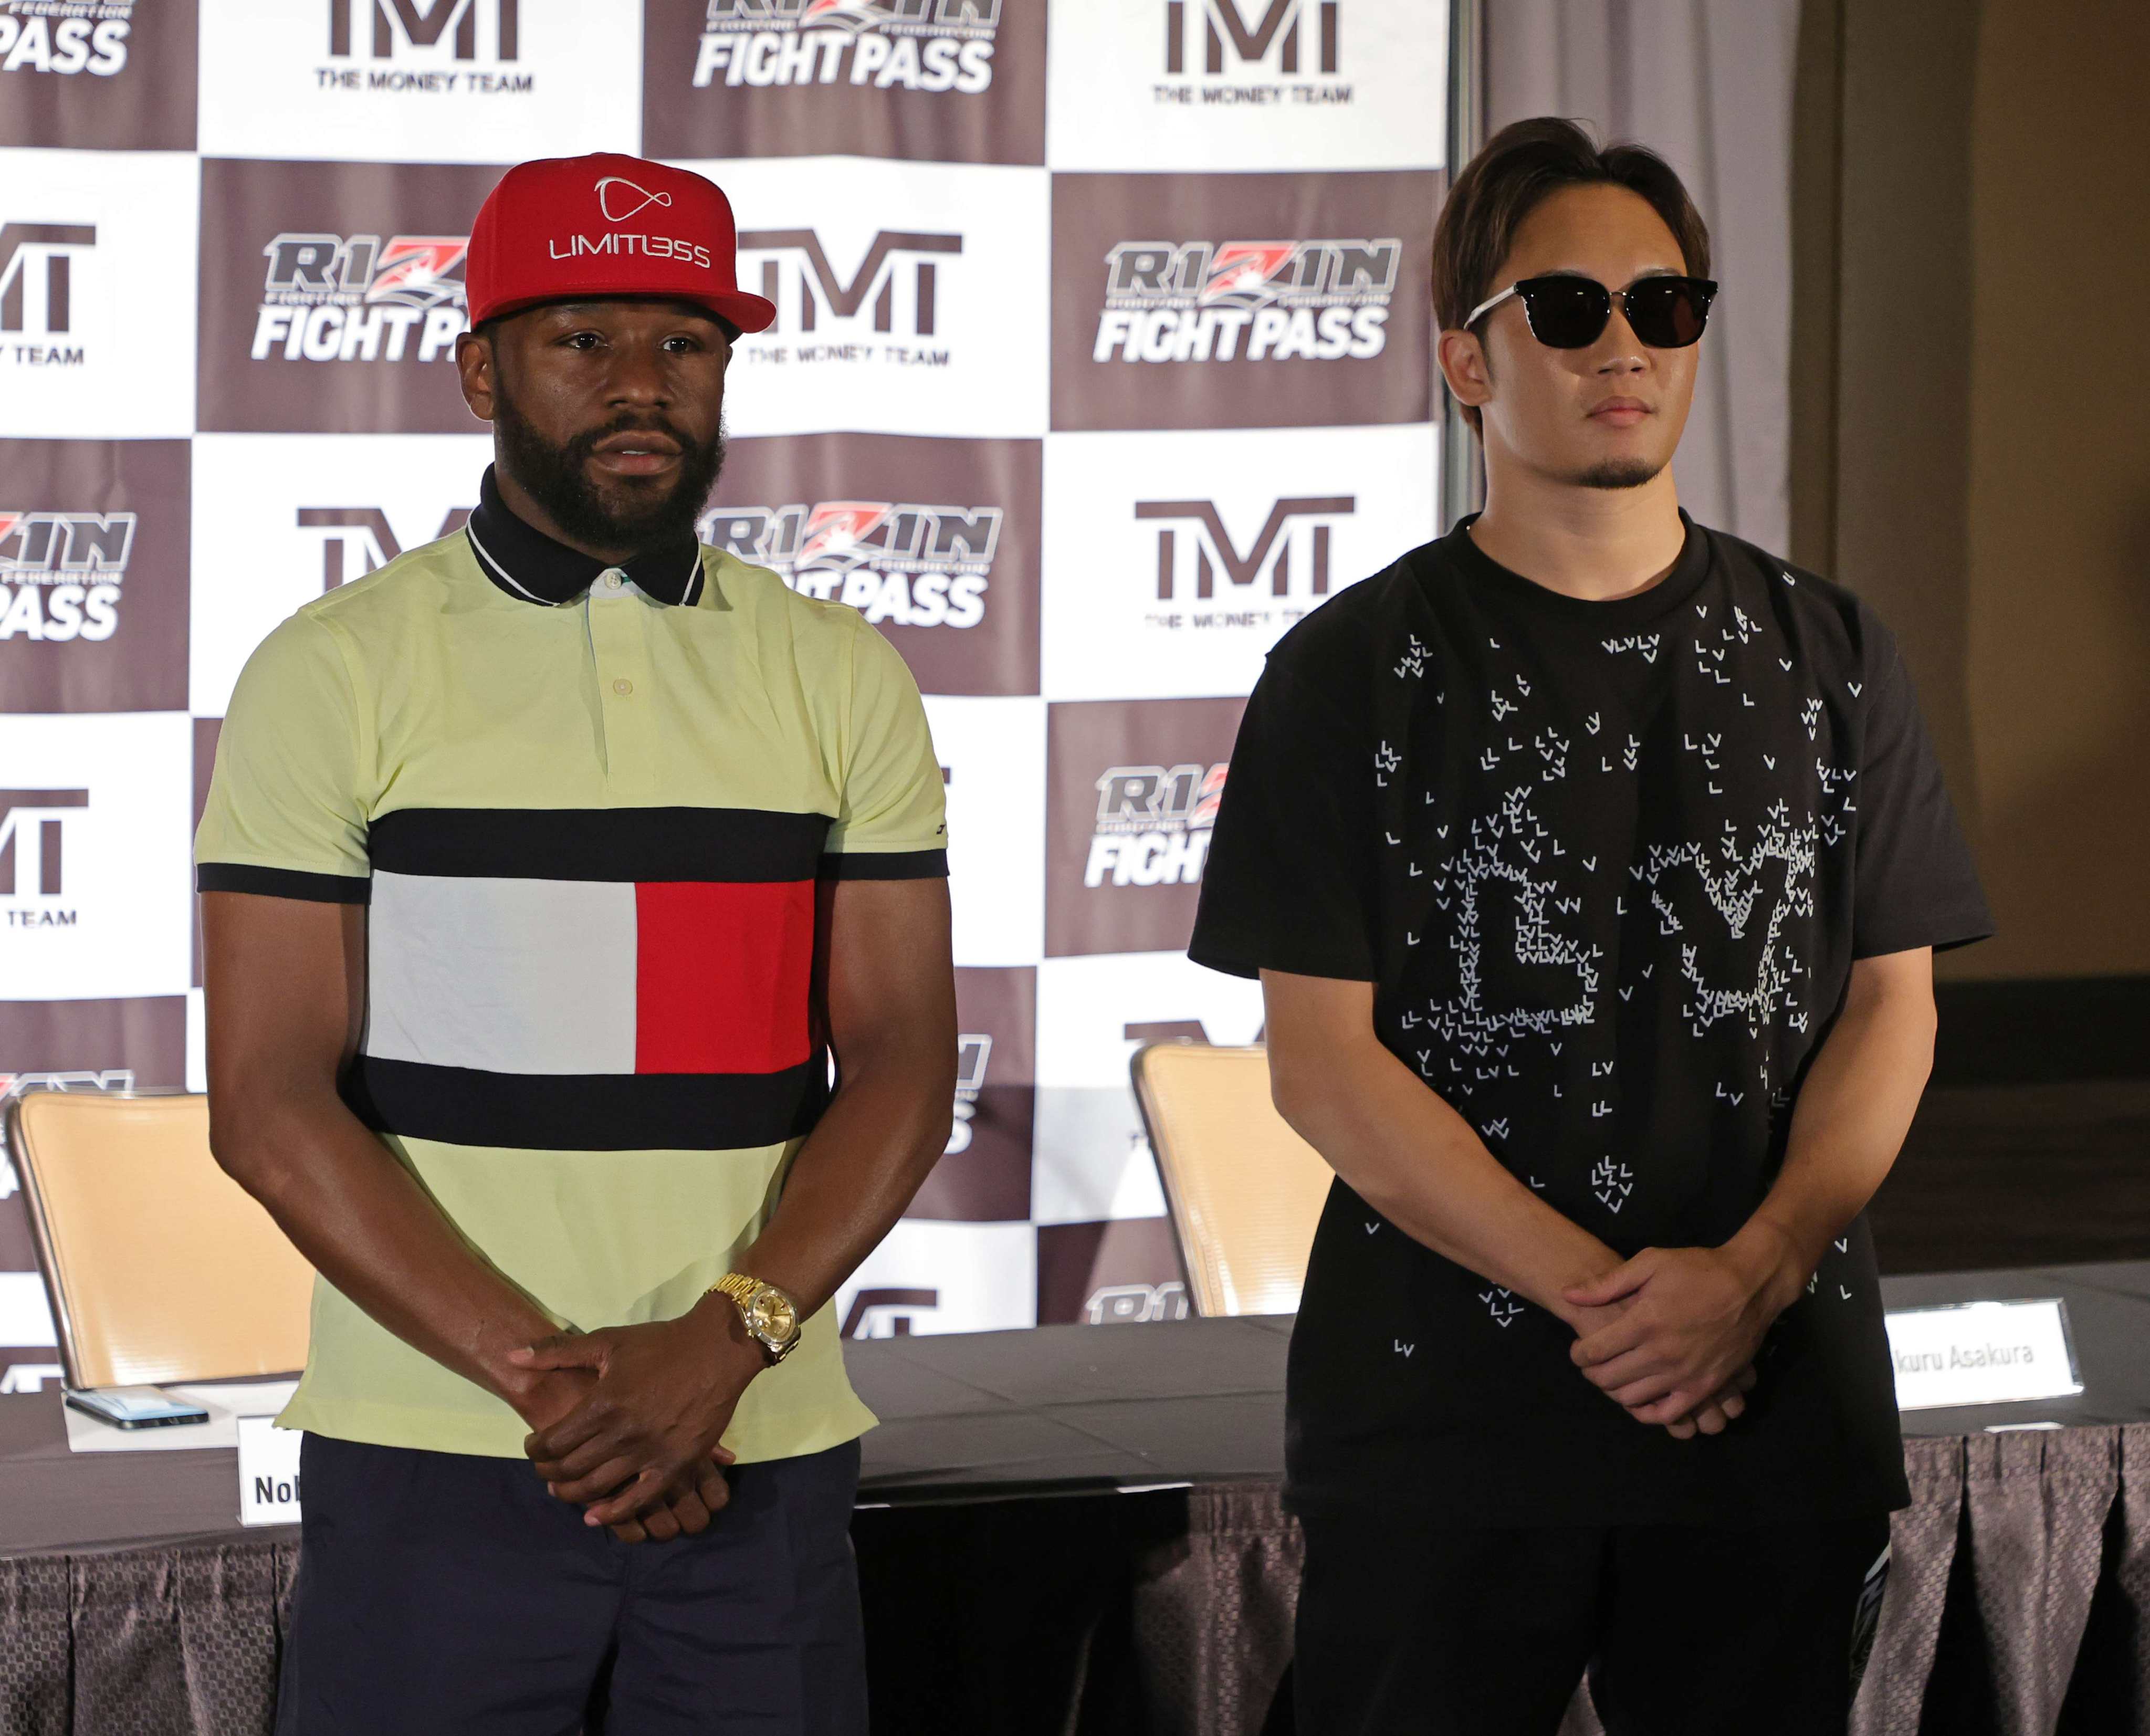 Floyd Mayweather Jnr (left) and mixed martial artist Mikuru Asakura pose during a news conference announcing their exhibition boxing bout at The M Resort on June 13, 2022 in Henderson, Nevada. The bout will take place in September 2022 in Japan as part of a Rizin Fighting Federation show. Photo: AFP